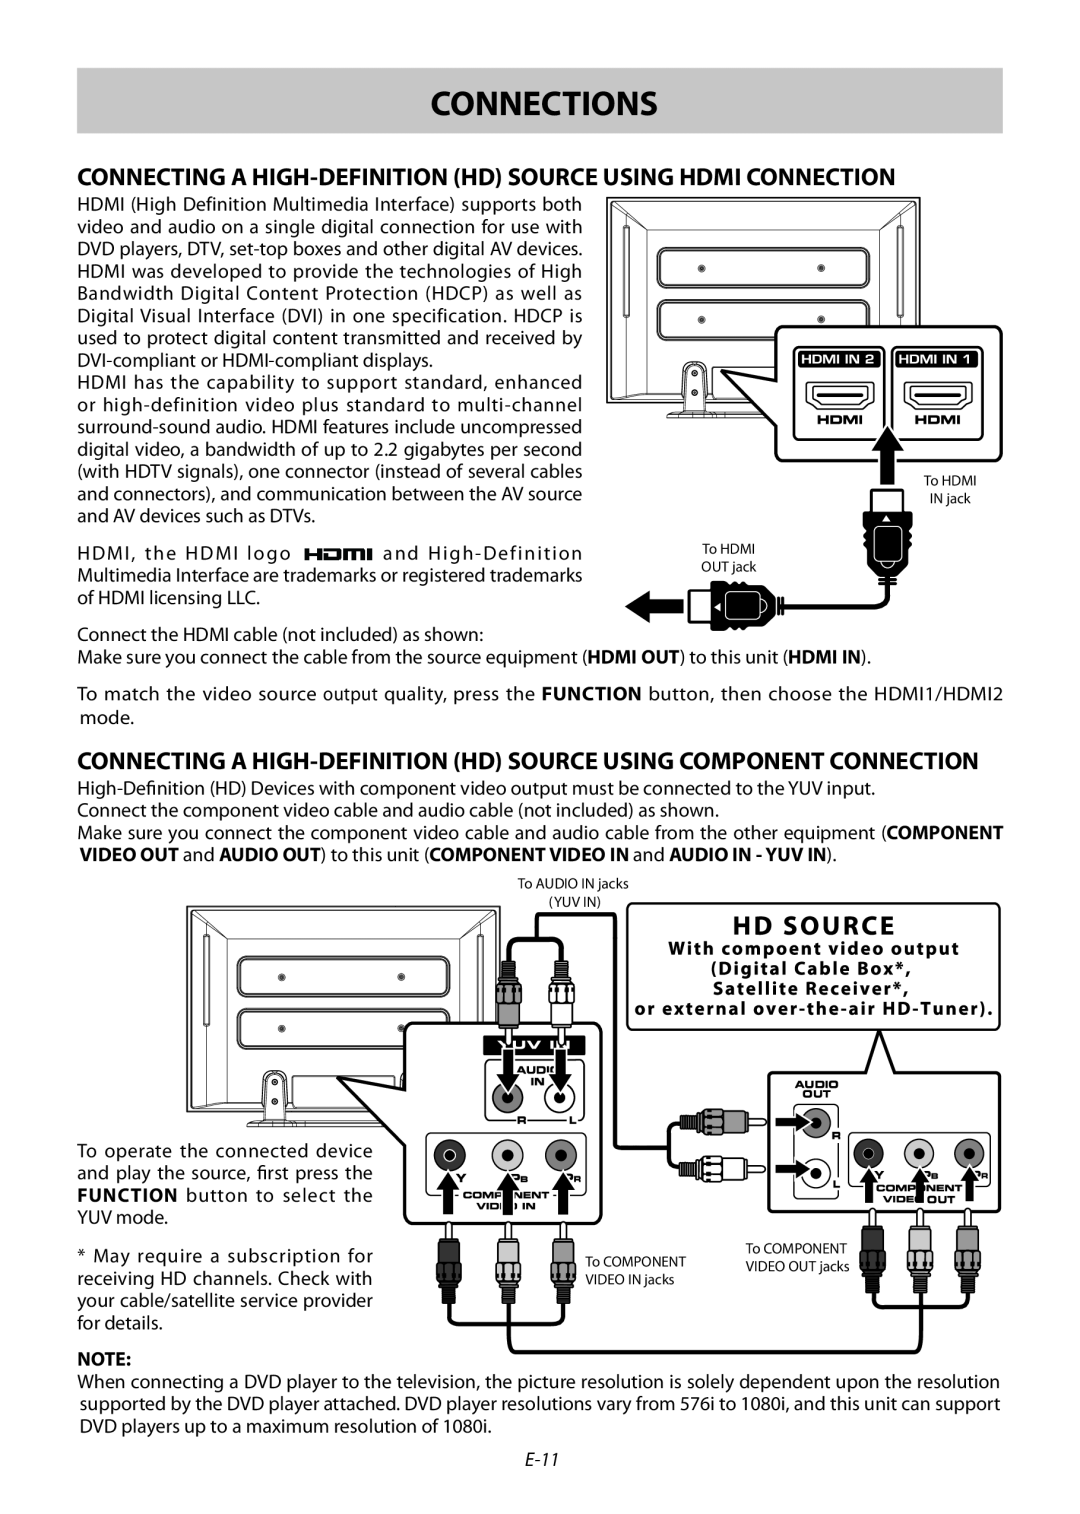 Technika 42-502 manual Connecting A High-Definition Hd Source Using Component Connection, E-11, Connections 